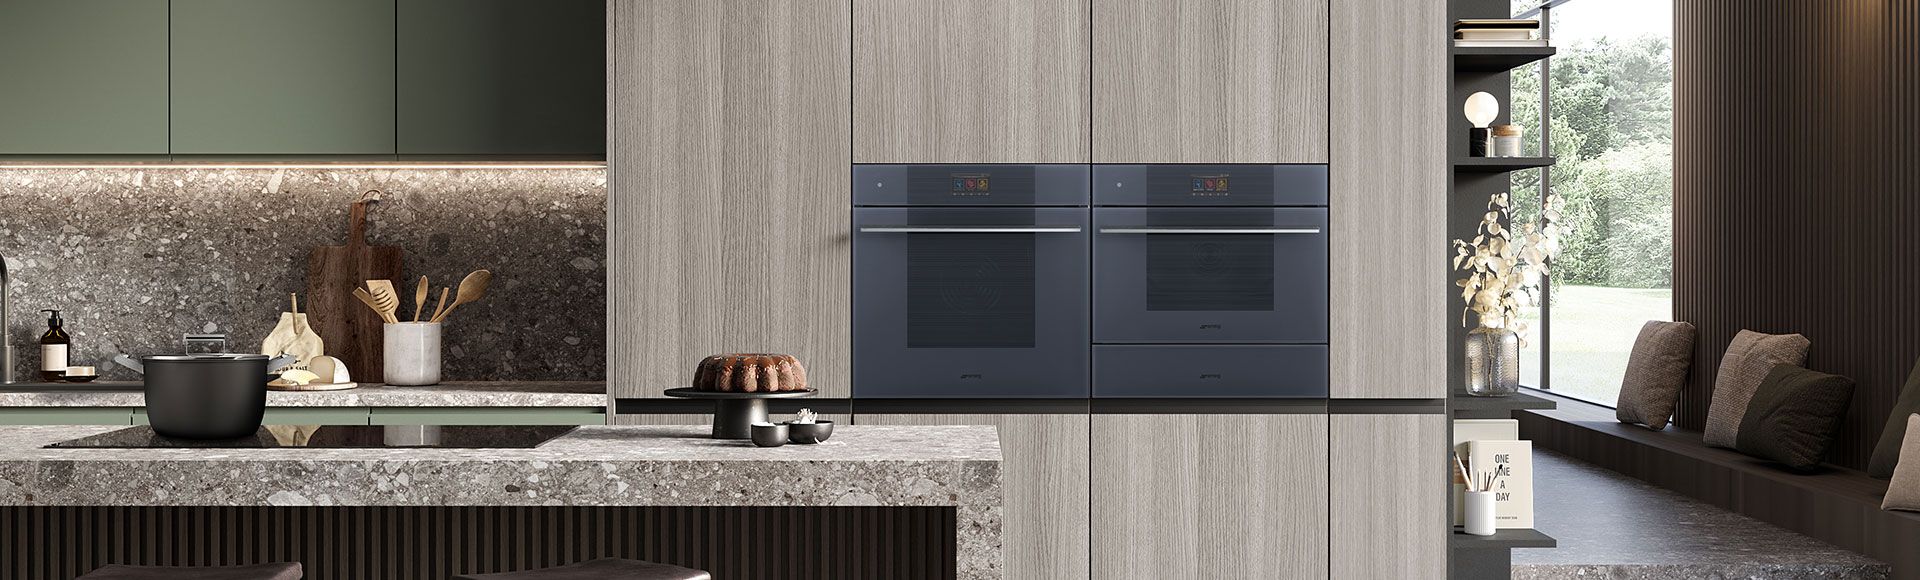 Smeg Sabbath mode: Ovens and warming drawers for observing the Sabbath